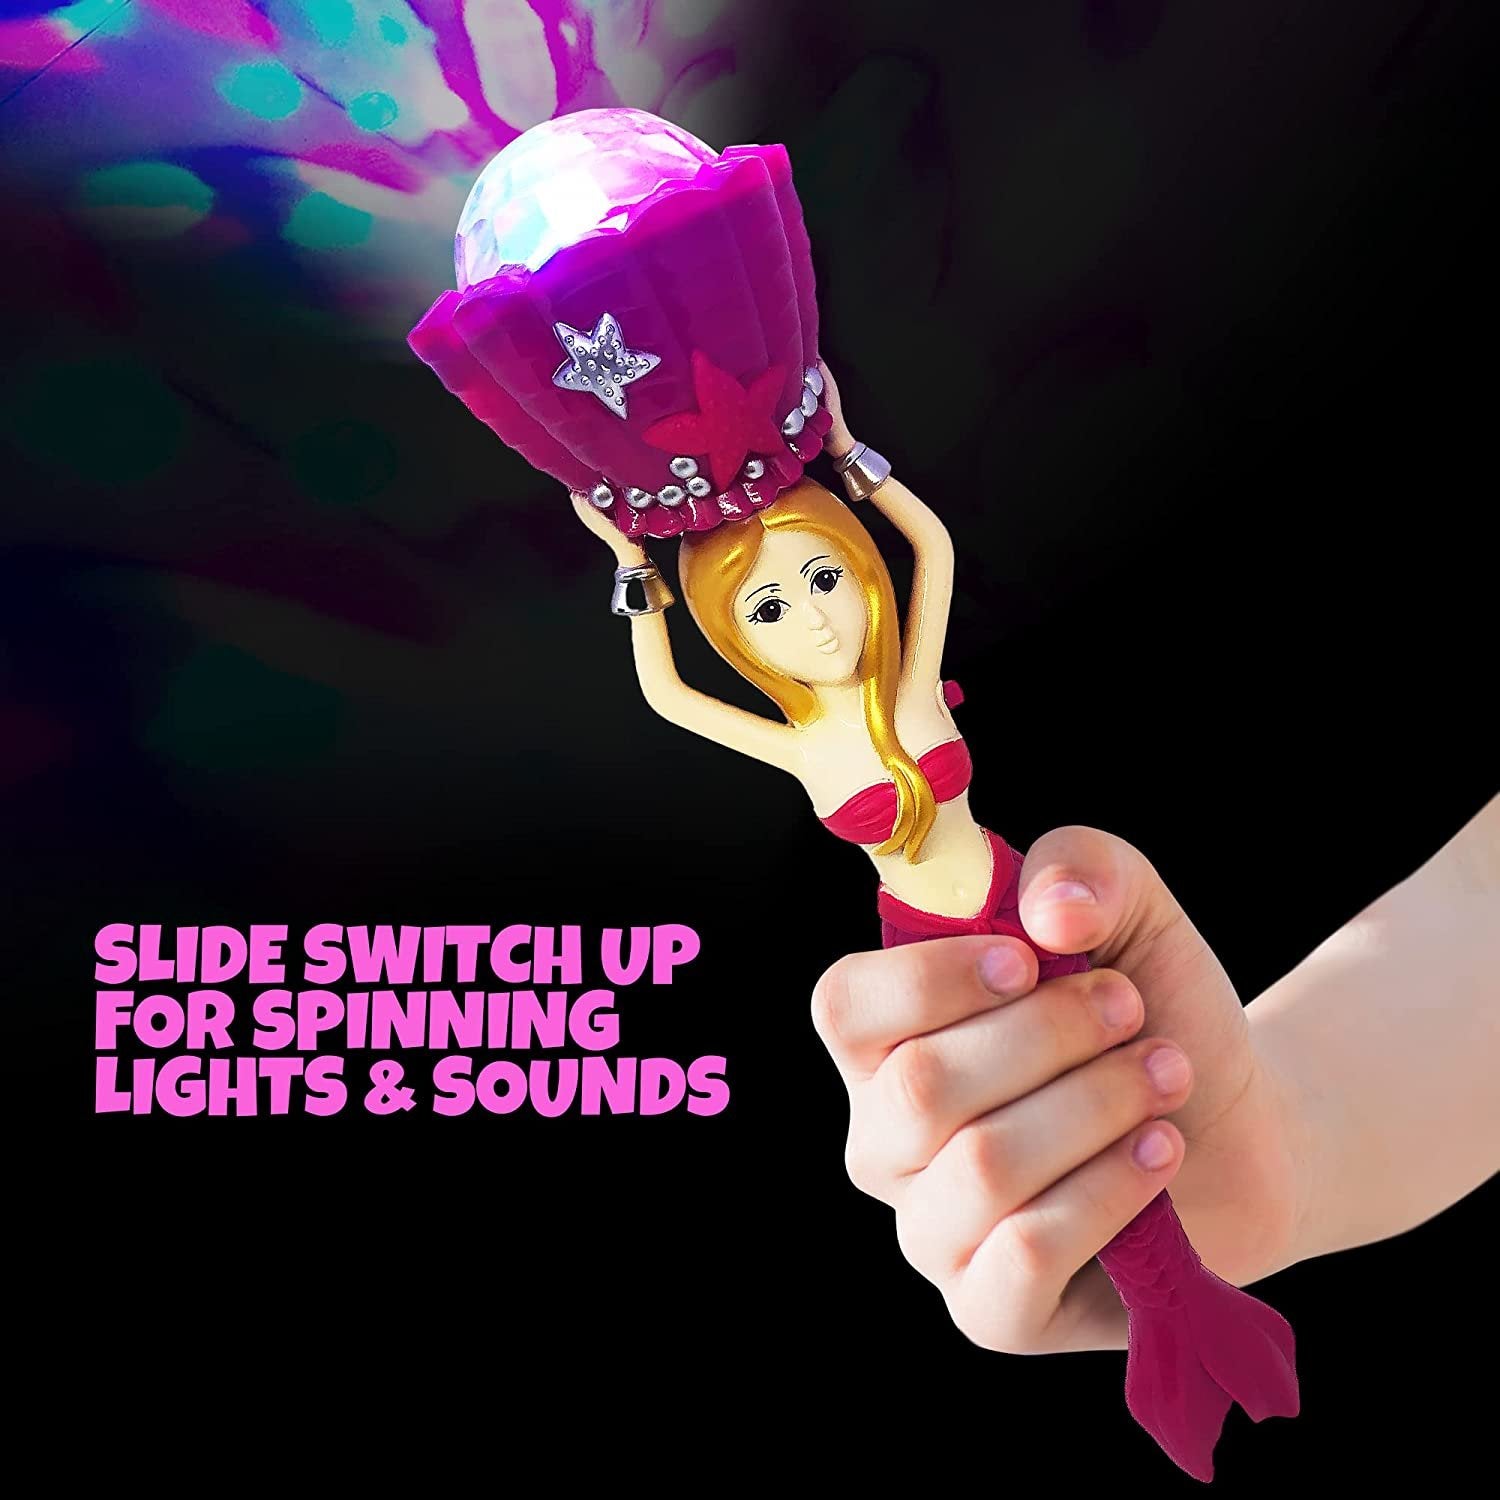 Light Up Mermaid Wand with Sounds, 11.75" Toy Wand with Spinning LEDs and Sound Effects, Batteries Included, Great Mermaid Gift Idea for Boys and Girls, Fun Birthday Party Favor